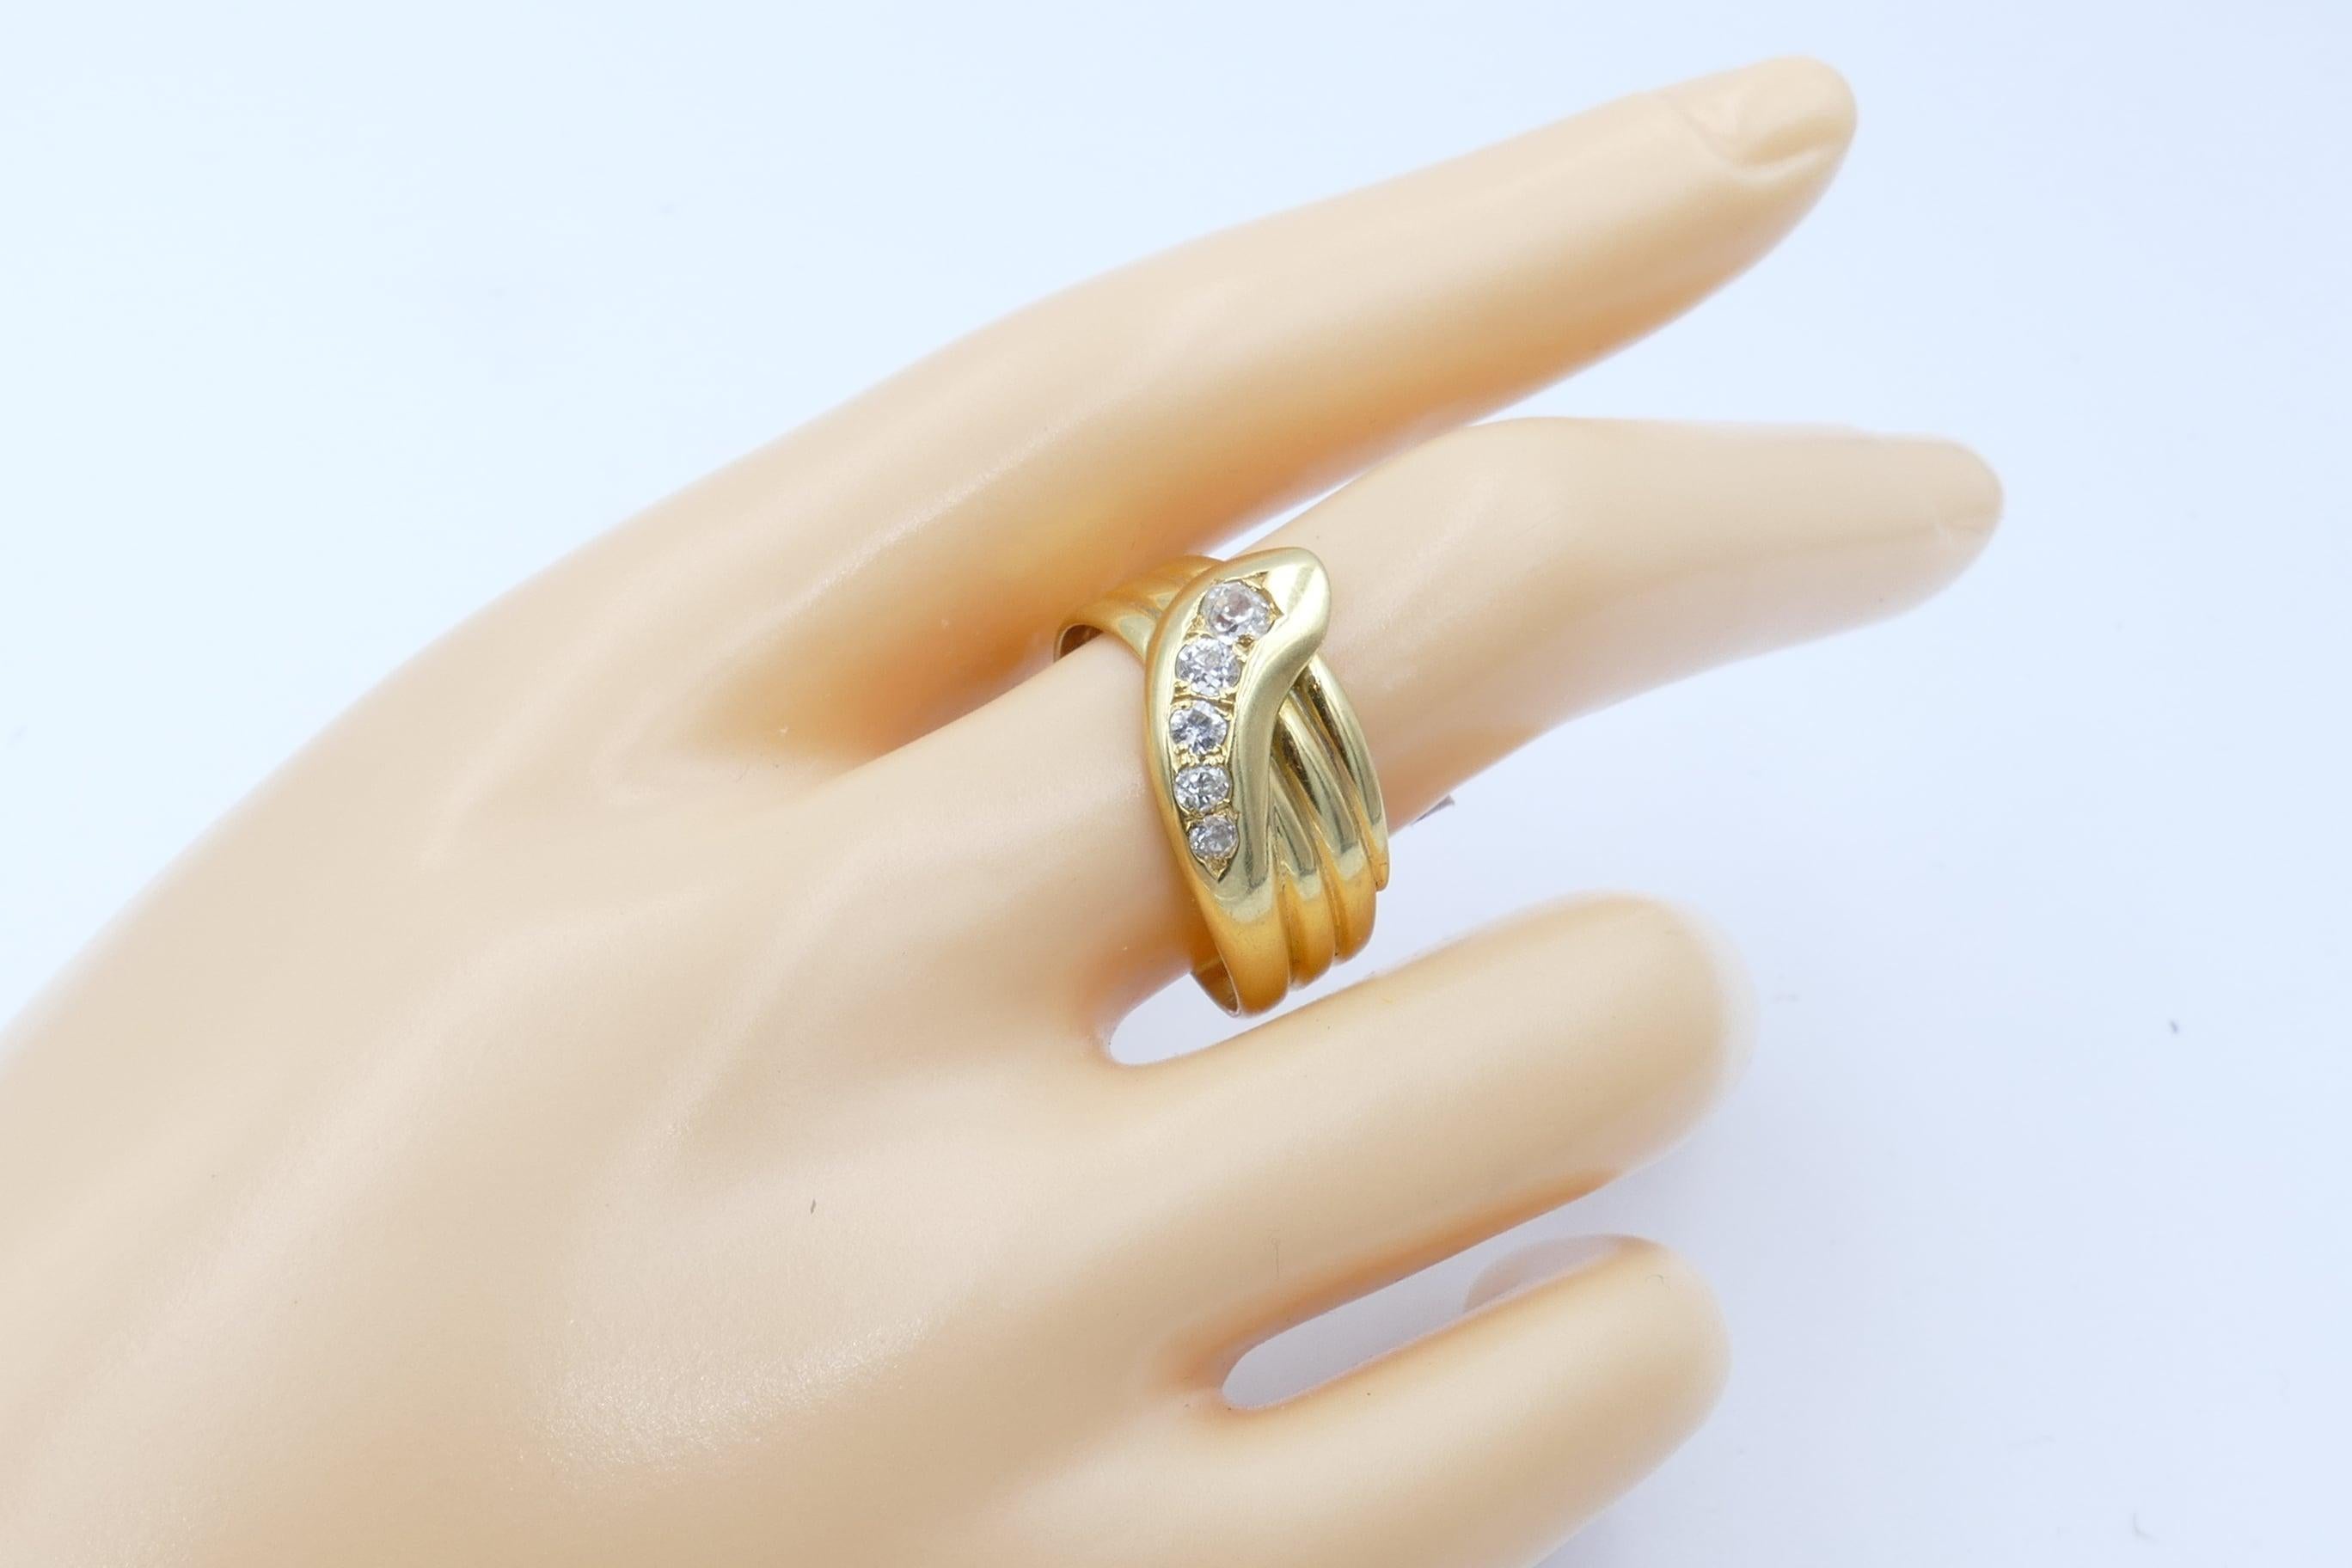 Antique Hallmarked 18 Carat Yellow Gold Diamond Snake Ring In Excellent Condition For Sale In Splitter's Creek, NSW